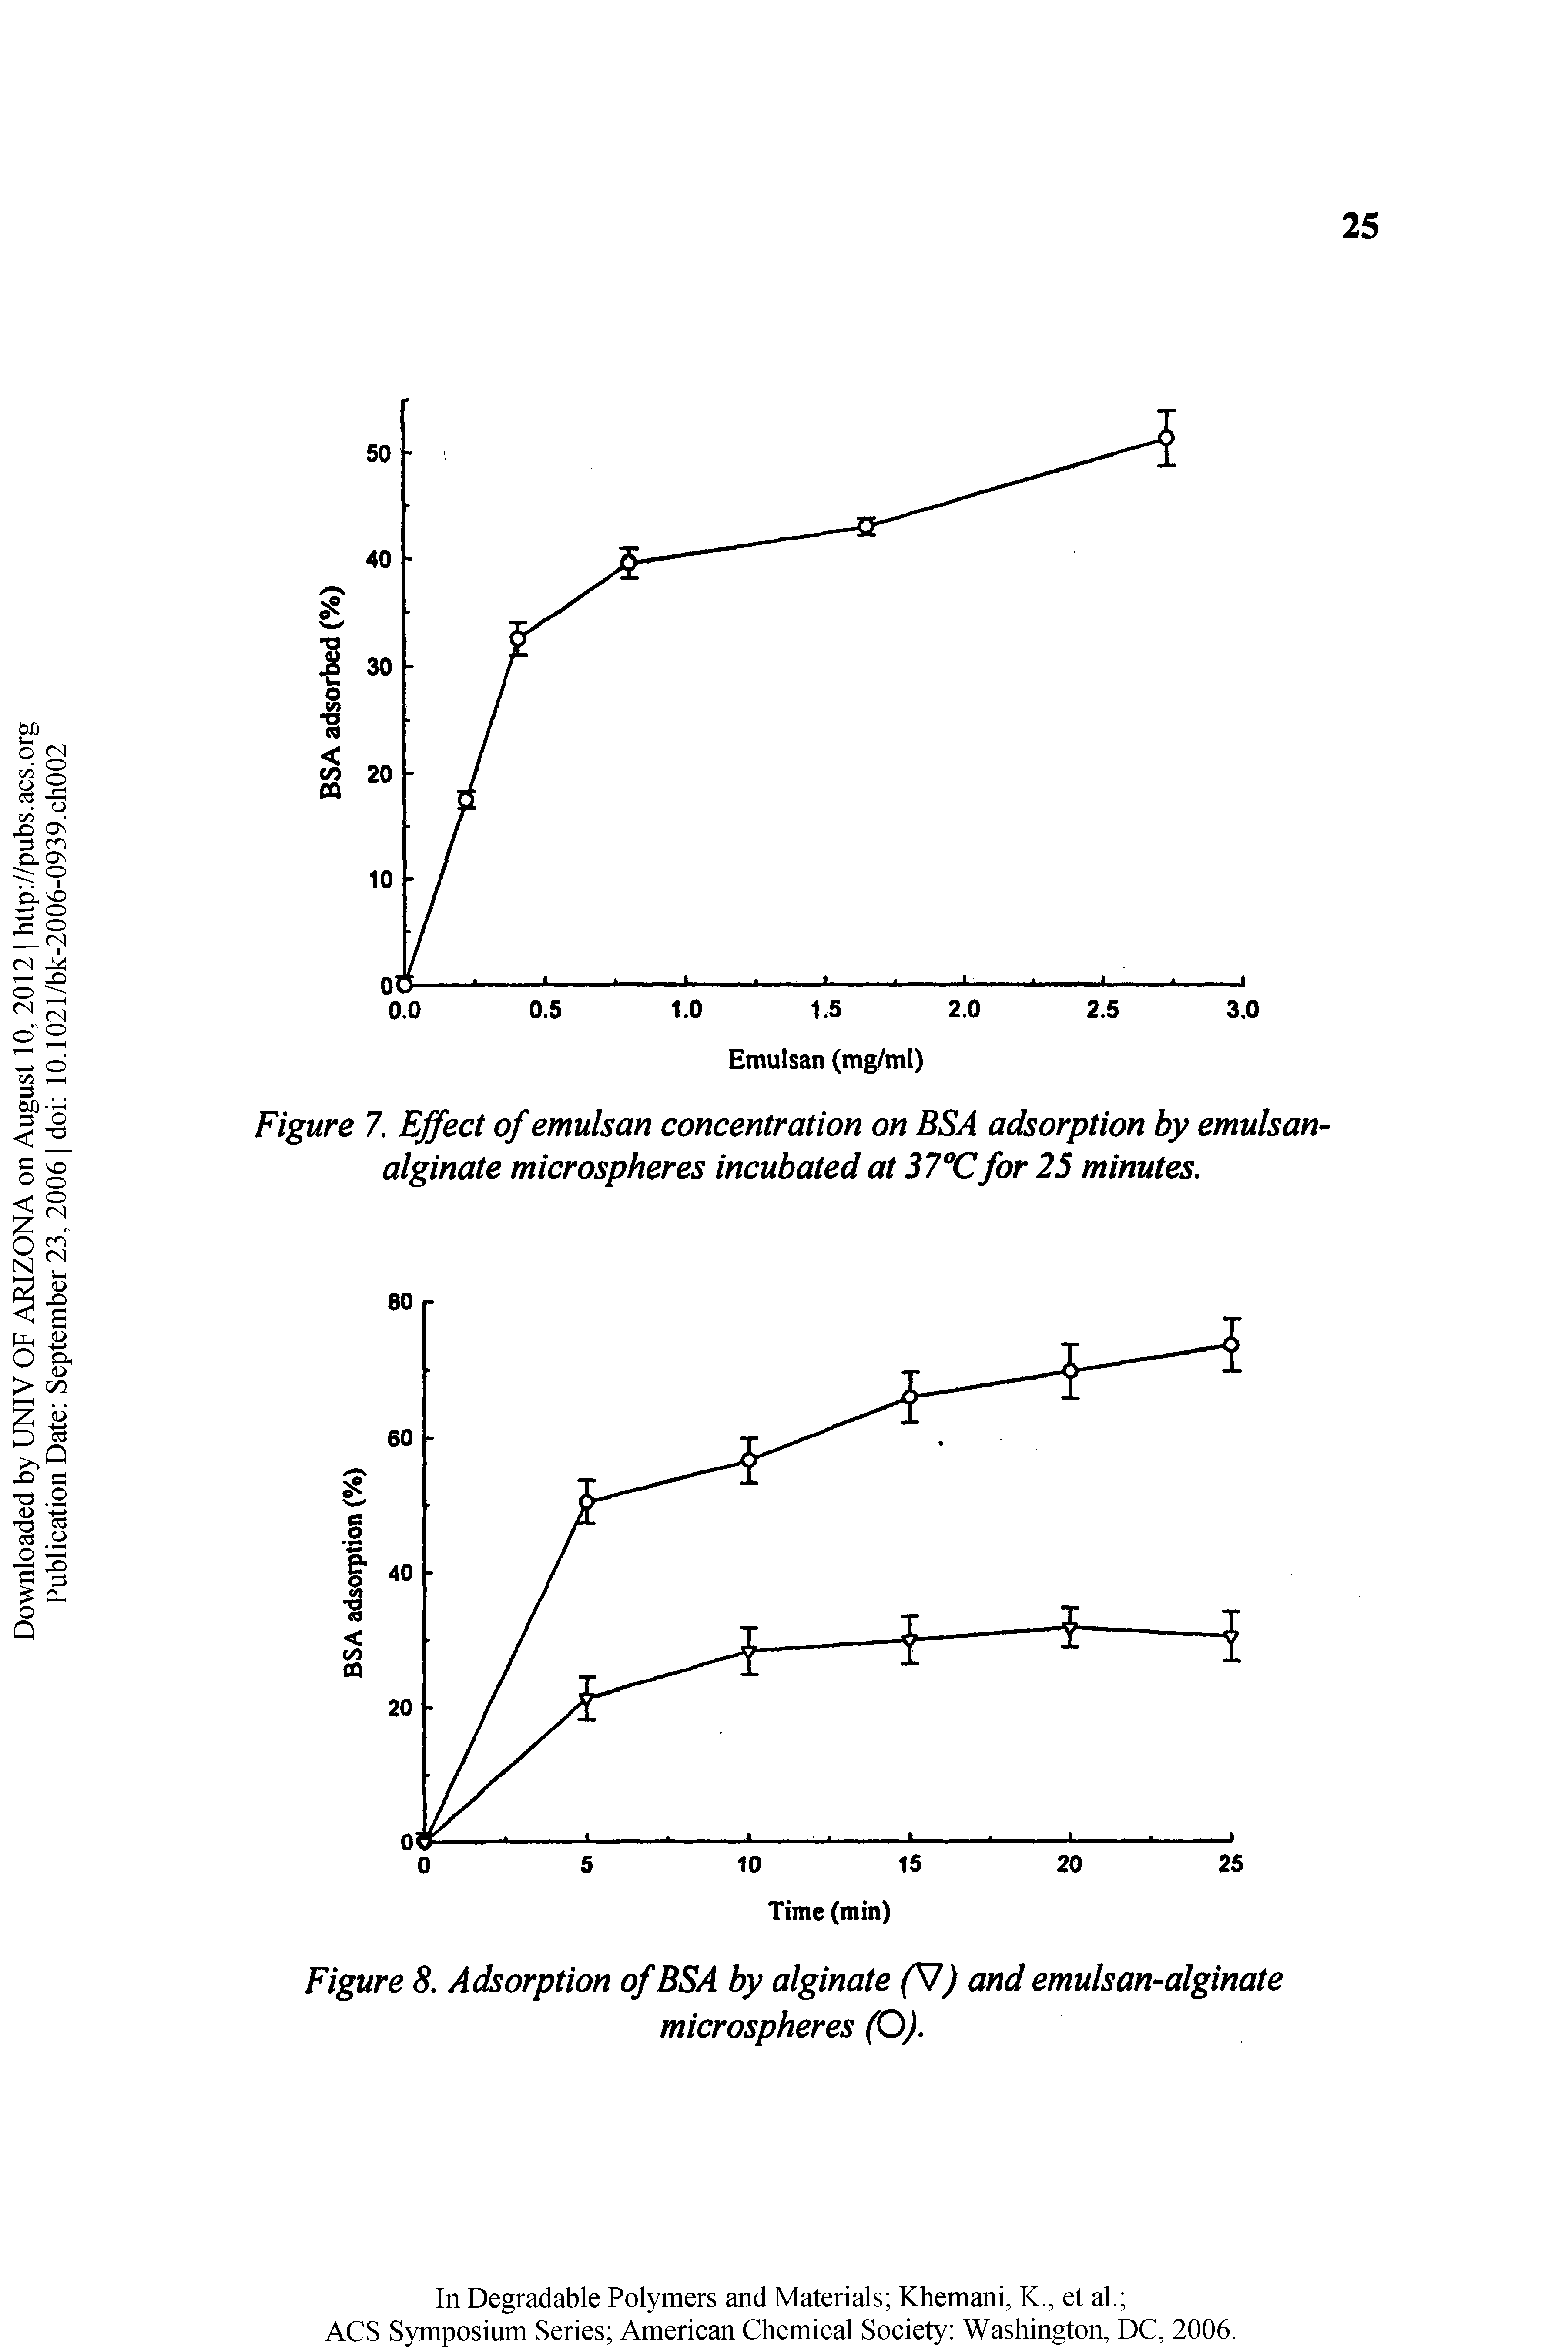 Figure 7. Effect of emulsan concentration on BSA adsorption by emulsan-alginate microspheres incubated at 37°C for 25 minutes.